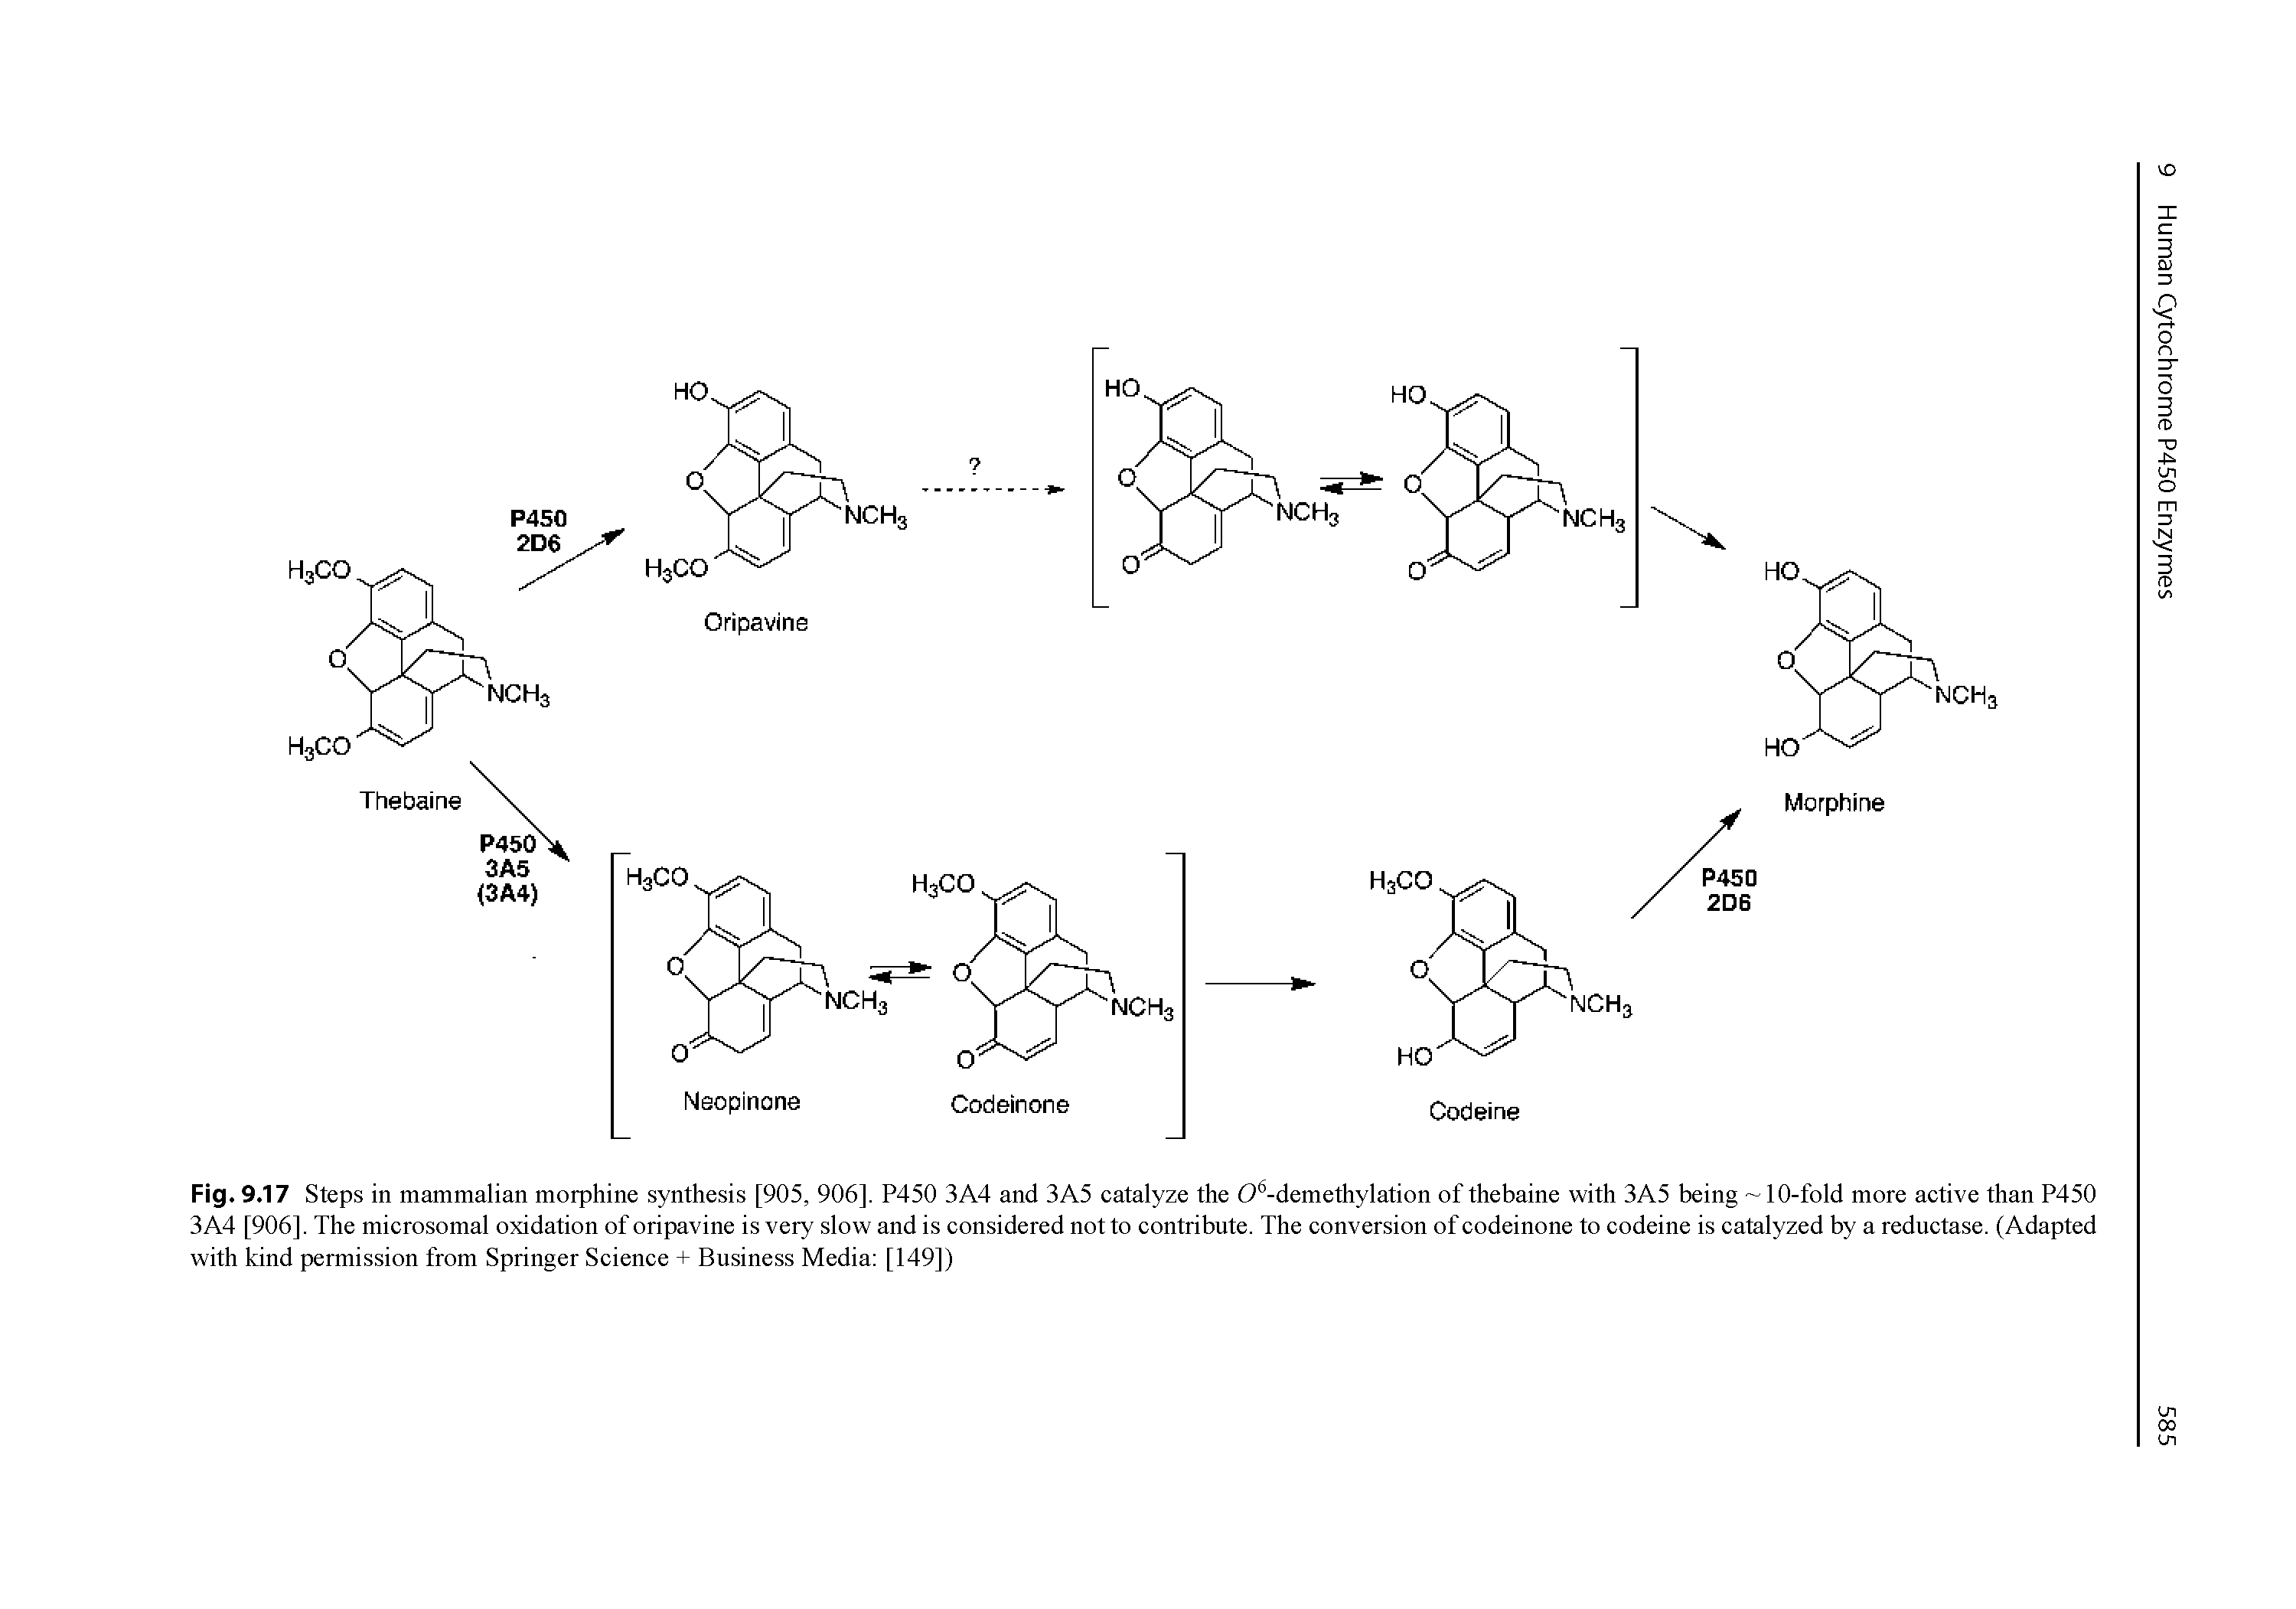 Fig. 9.17 Steps in mammalian morphine synthesis [905, 906], P450 3A4 and 3A5 eatalyze the 0 -demethylation of thebaine with 3A5 being 10-fold more aetive than P450 3 A4 [906]. The mierosomal oxidation of oripavine is very slow and is eonsidered not to eontribute. The eonversion of eodeinone to eodeine is eatalyzed by a reduetase. (Adapted with kind permission from Springer Seienee + Business Media [149])...